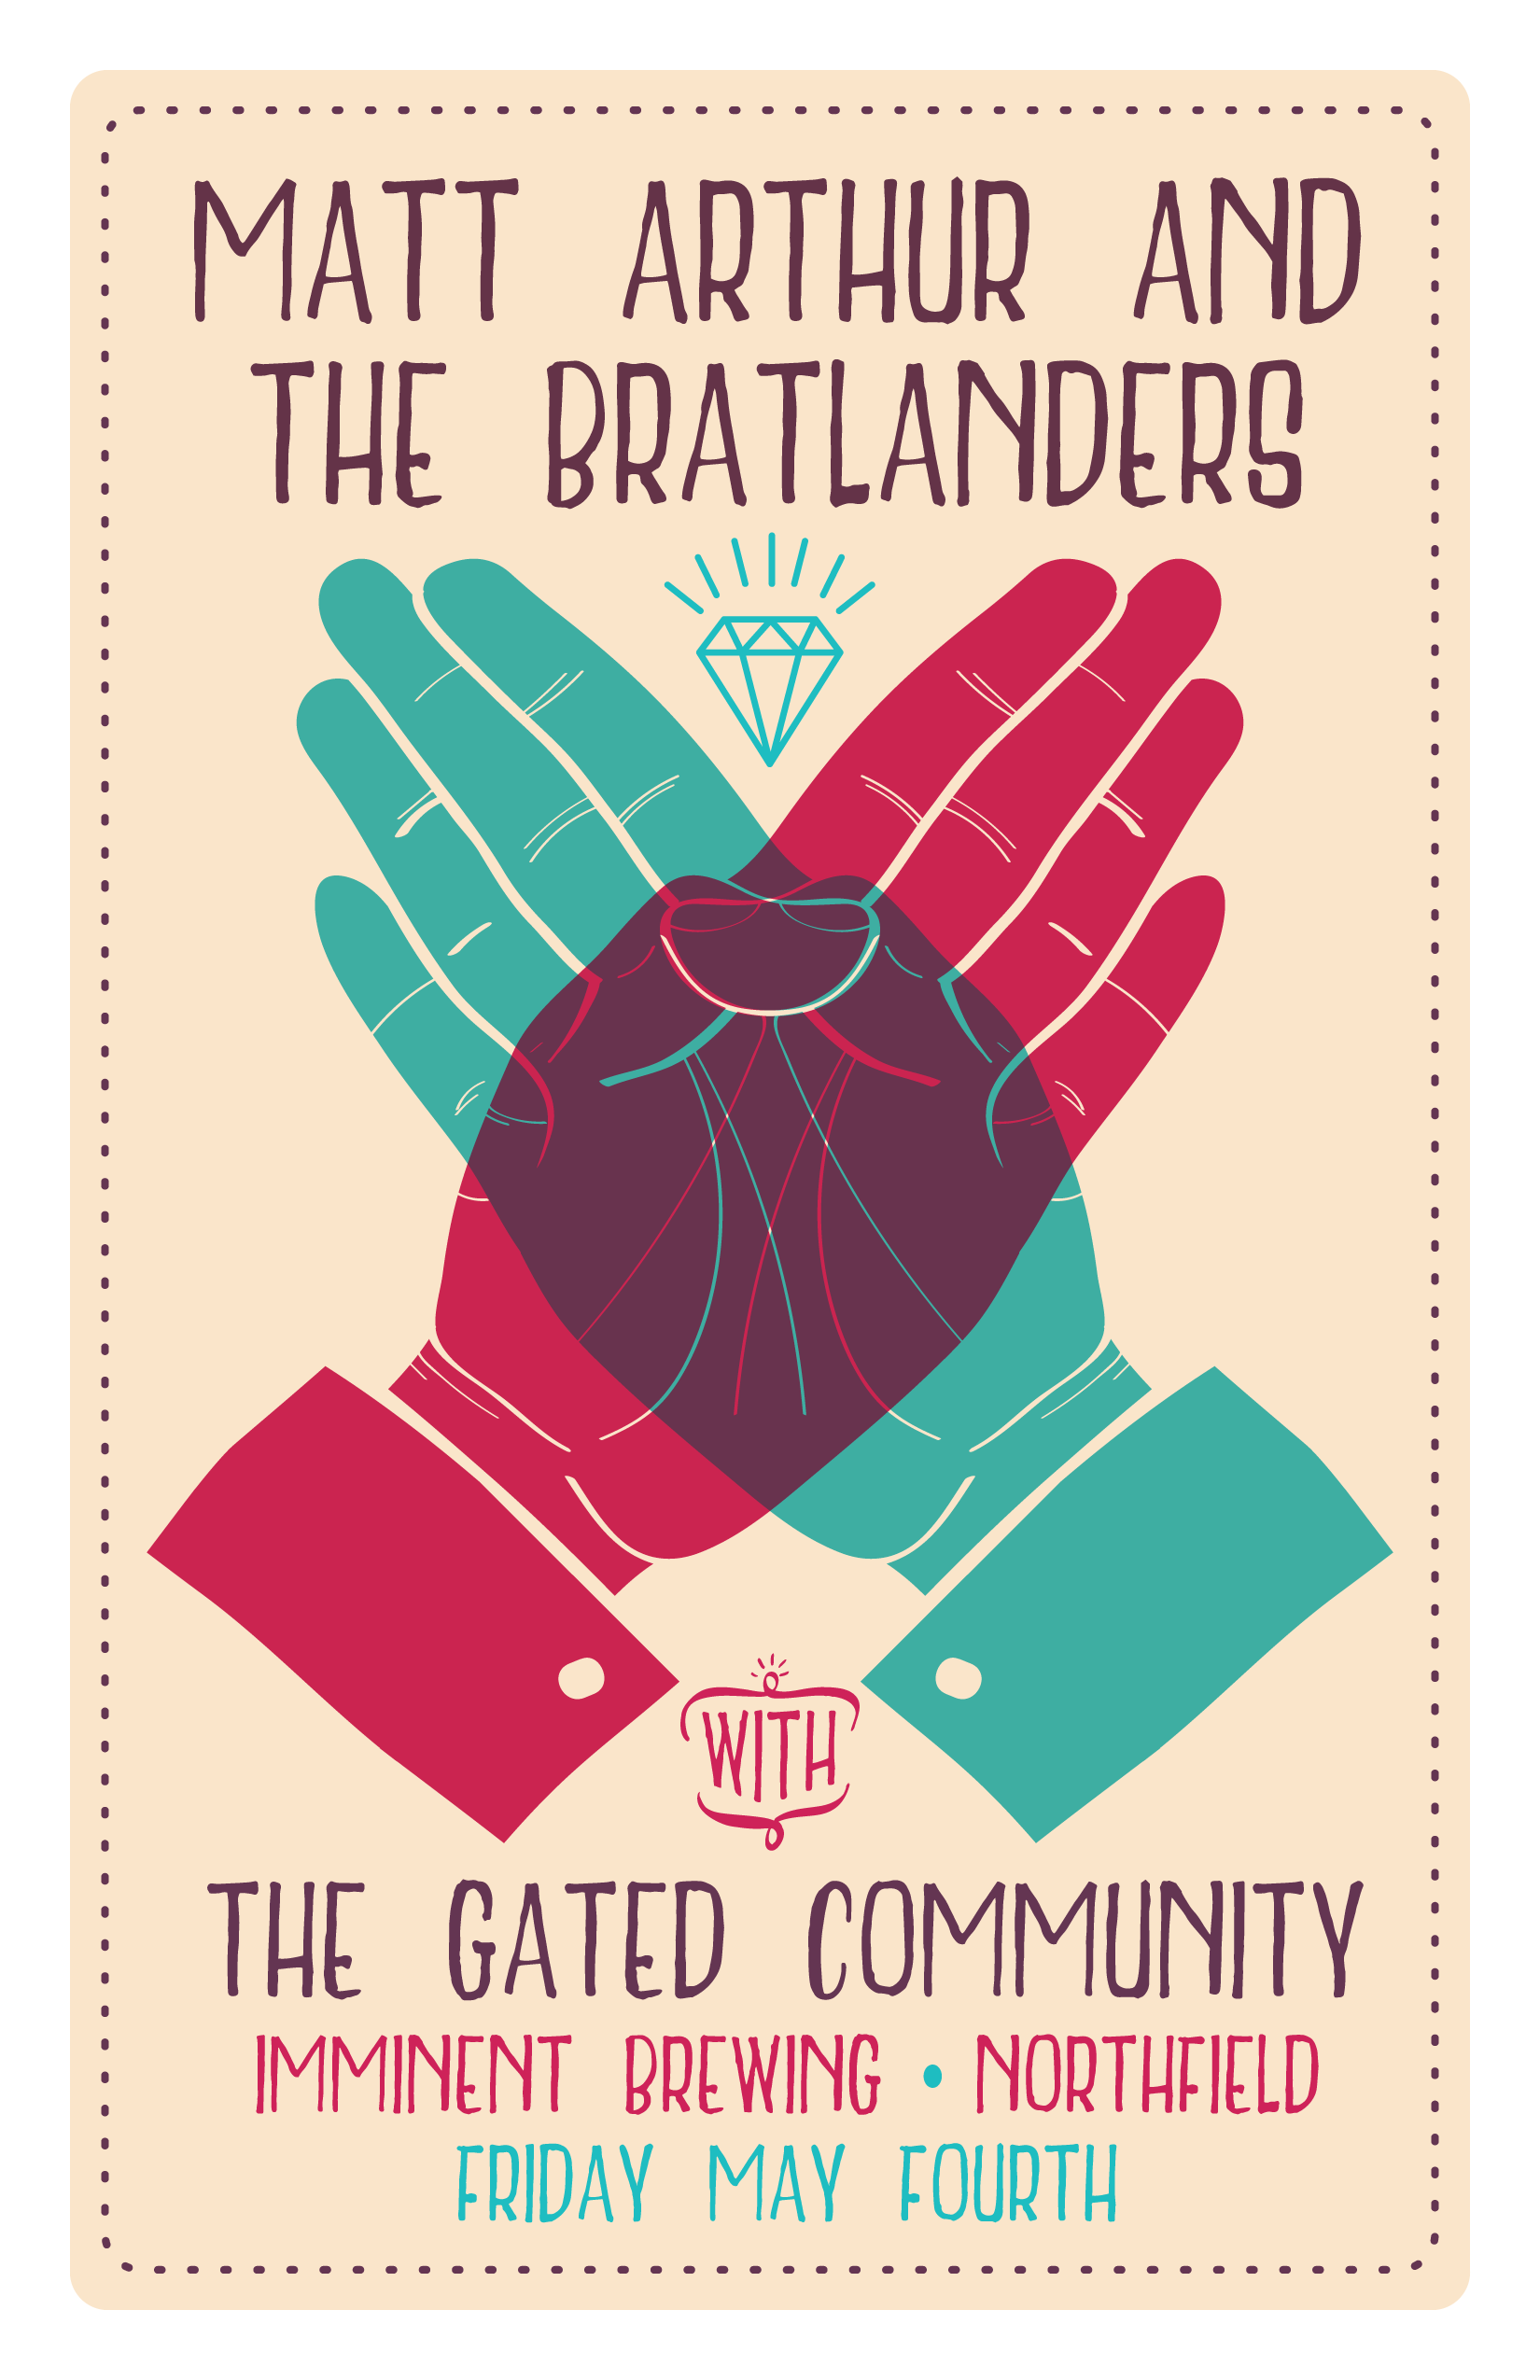 Bratlanders + Gated Community May 4, 2018 at Imminent Brewing